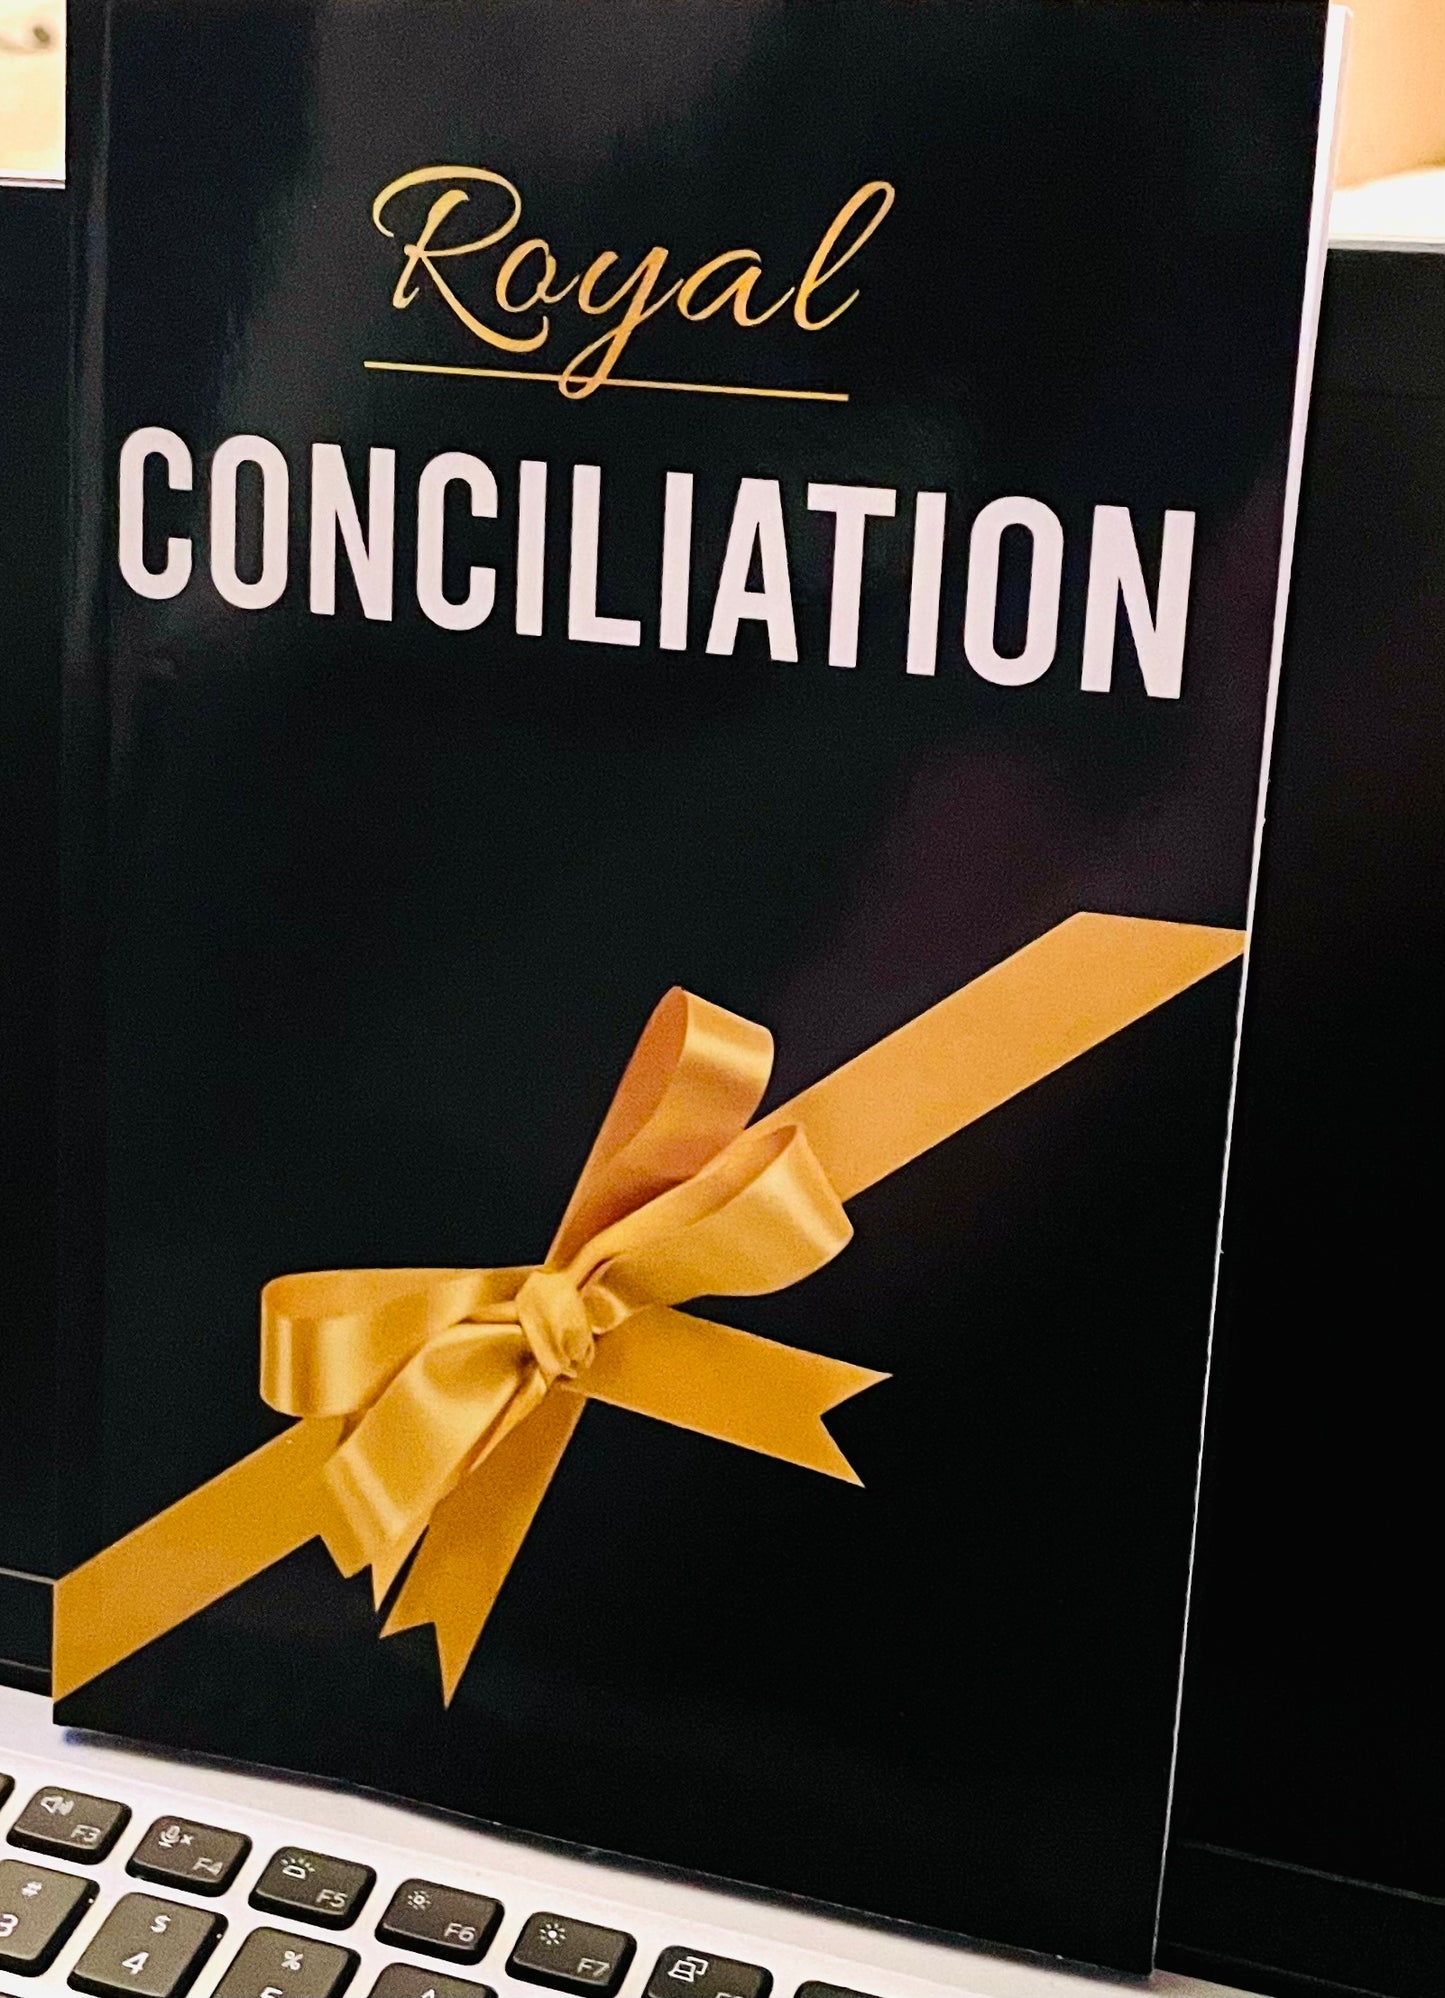 Royal Conciliation; A Guide to obtaining a healthy lasting relationship